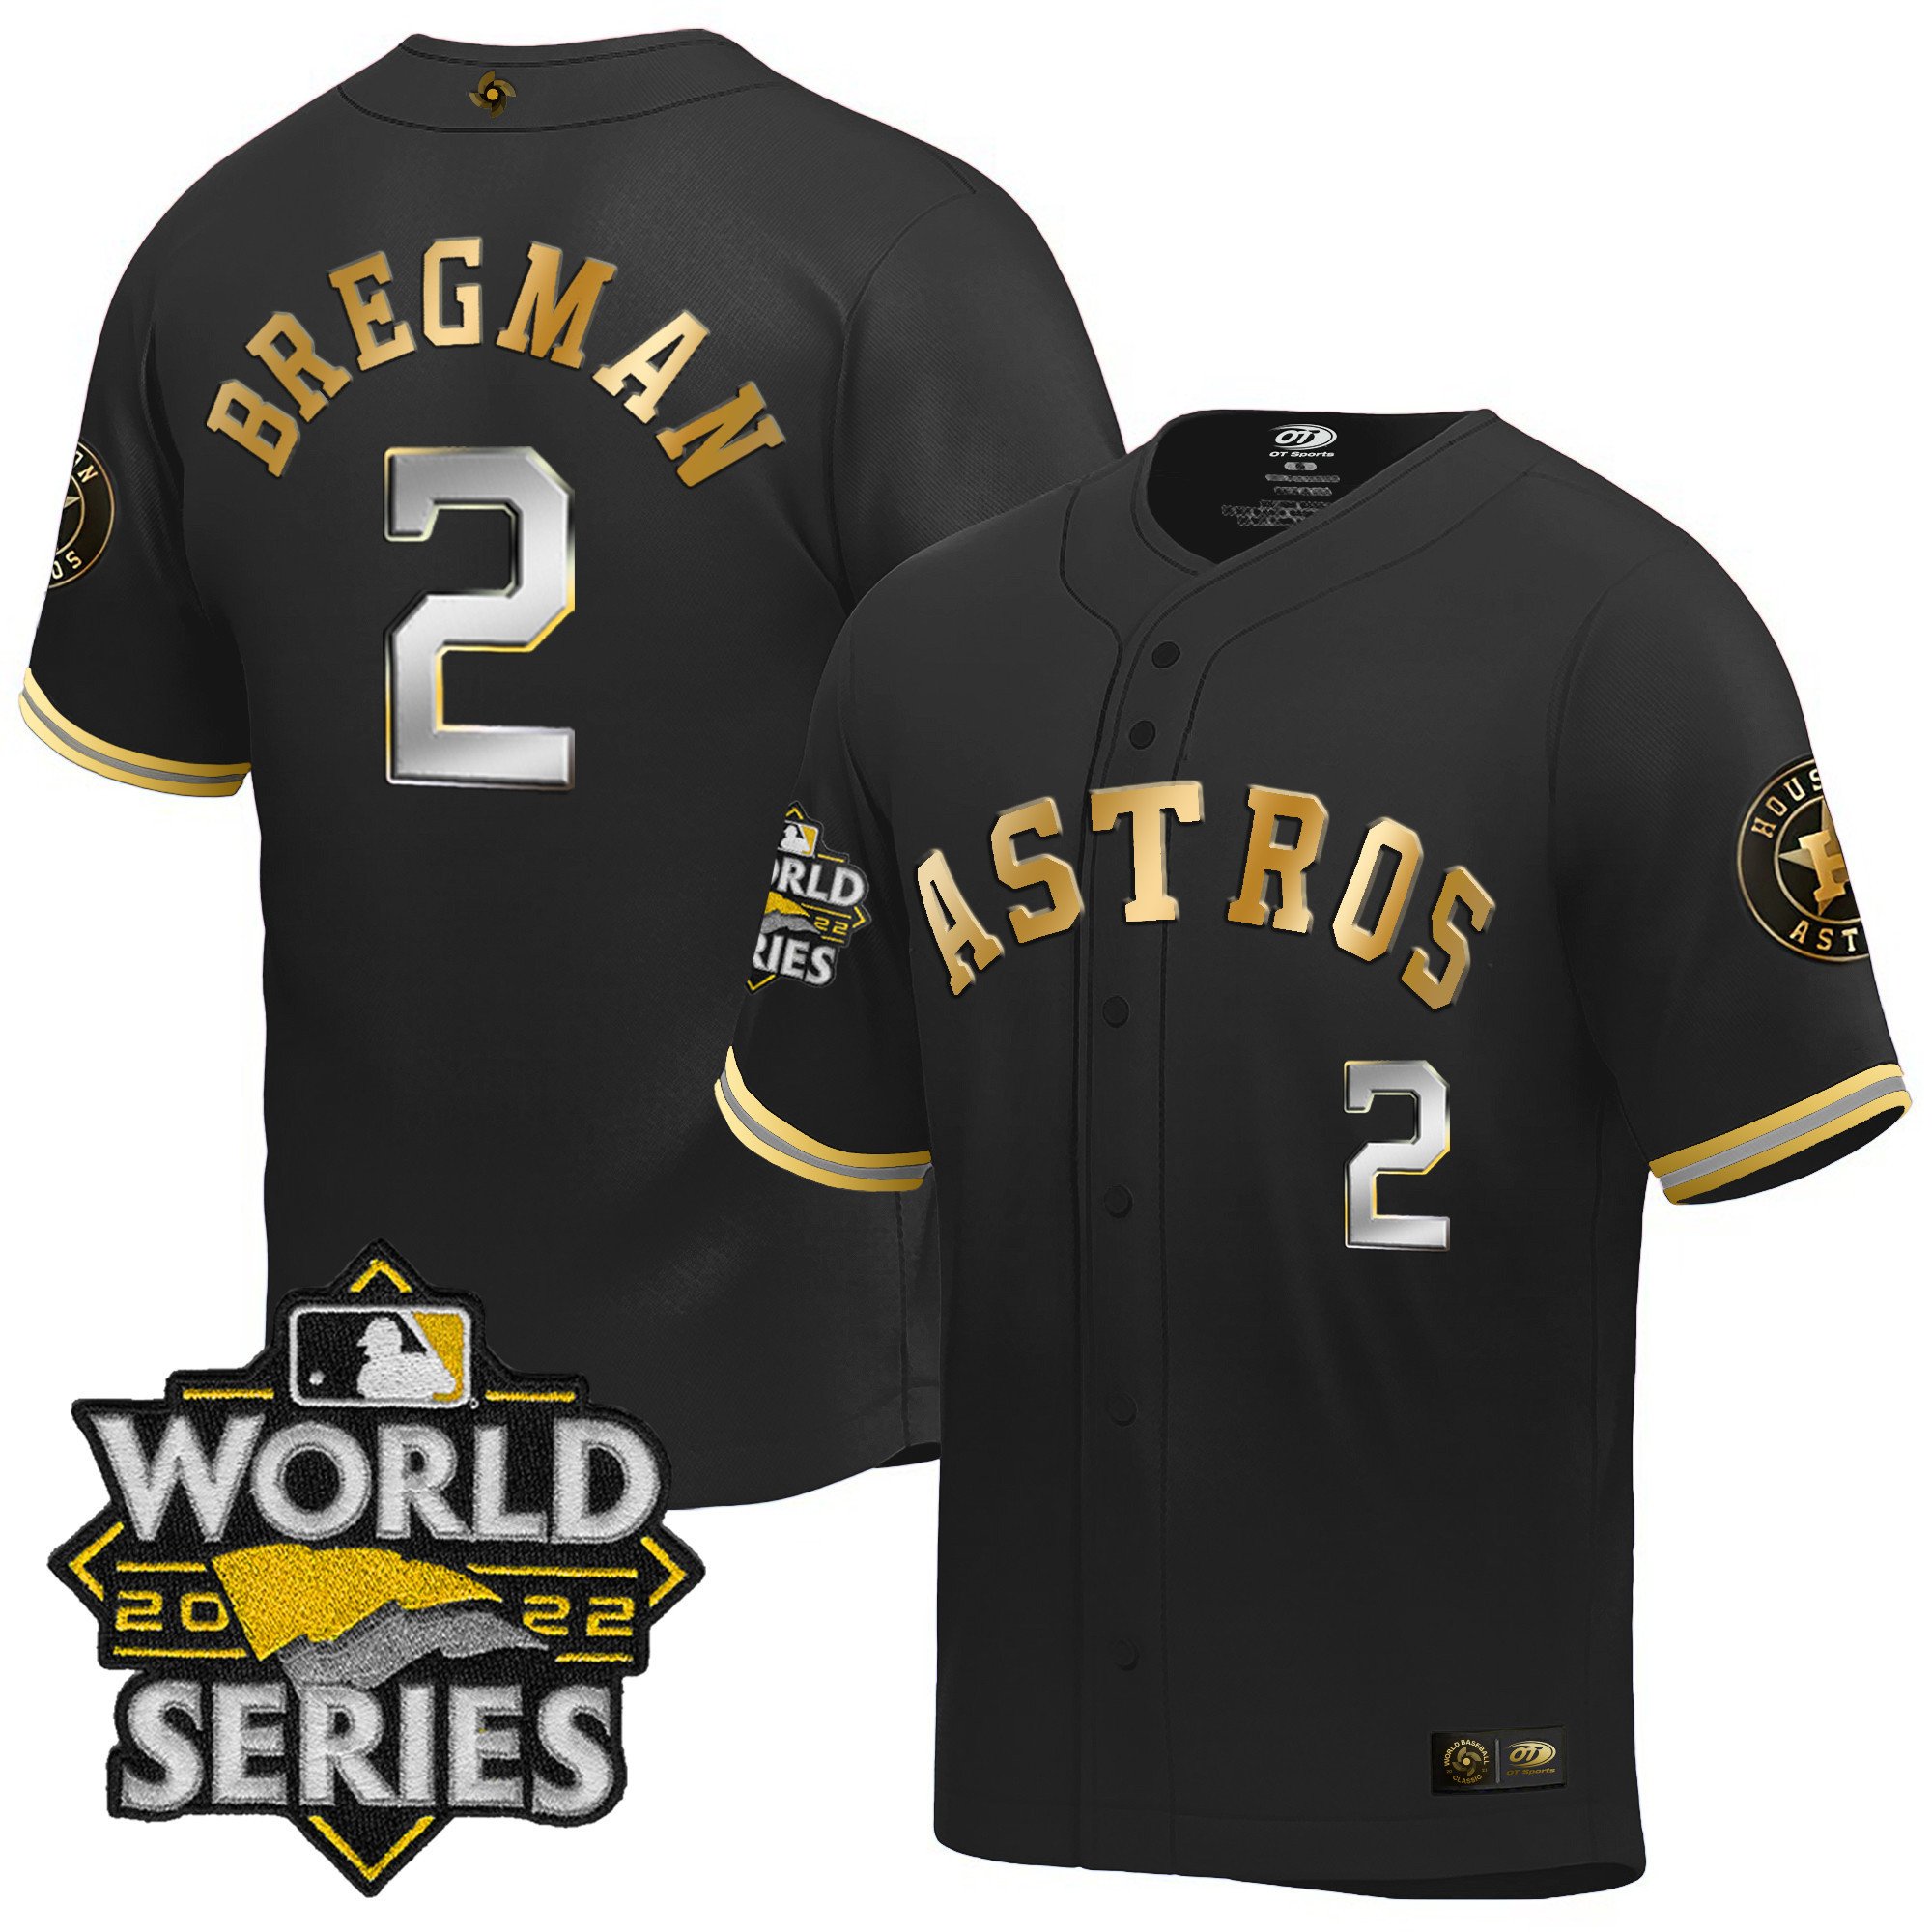 Men's Houston Astros World Series Classic Jersey - All Stitched